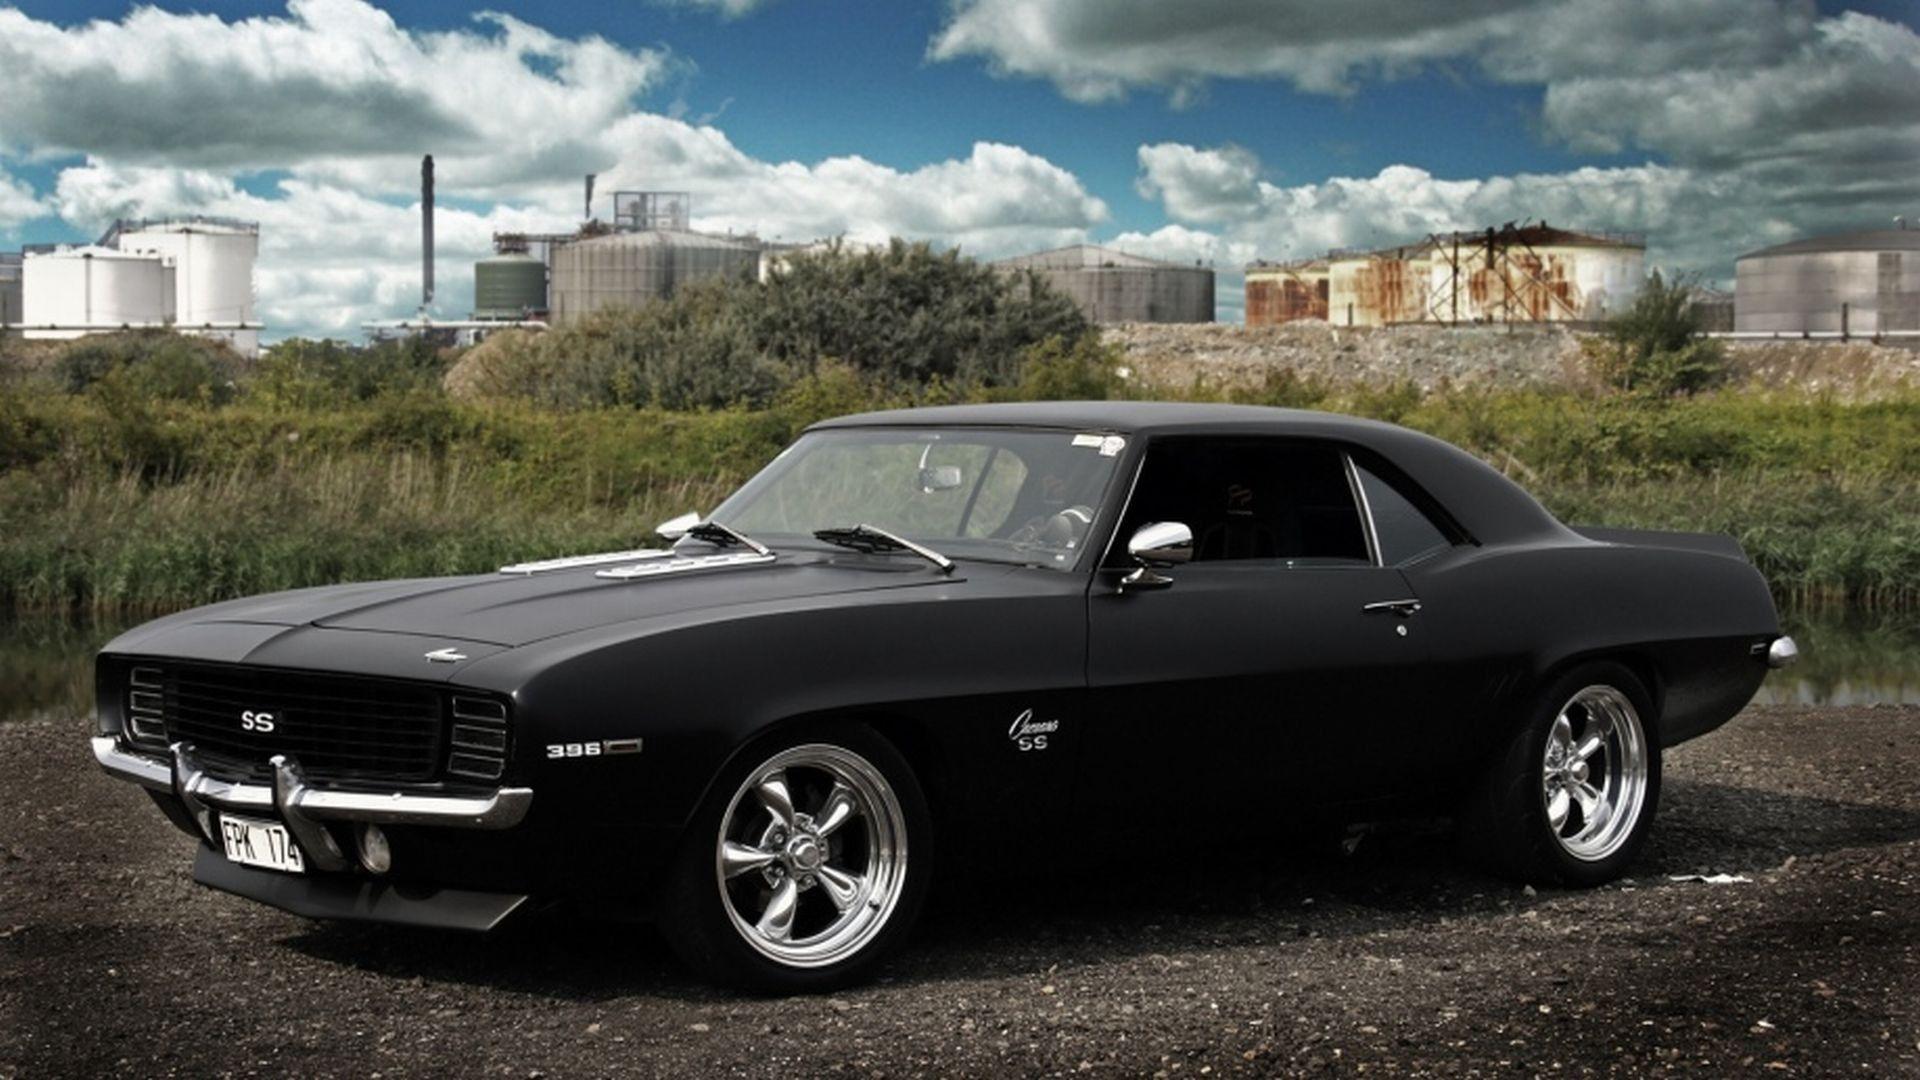 Muscle Car HD Picture Wallpapers 8305